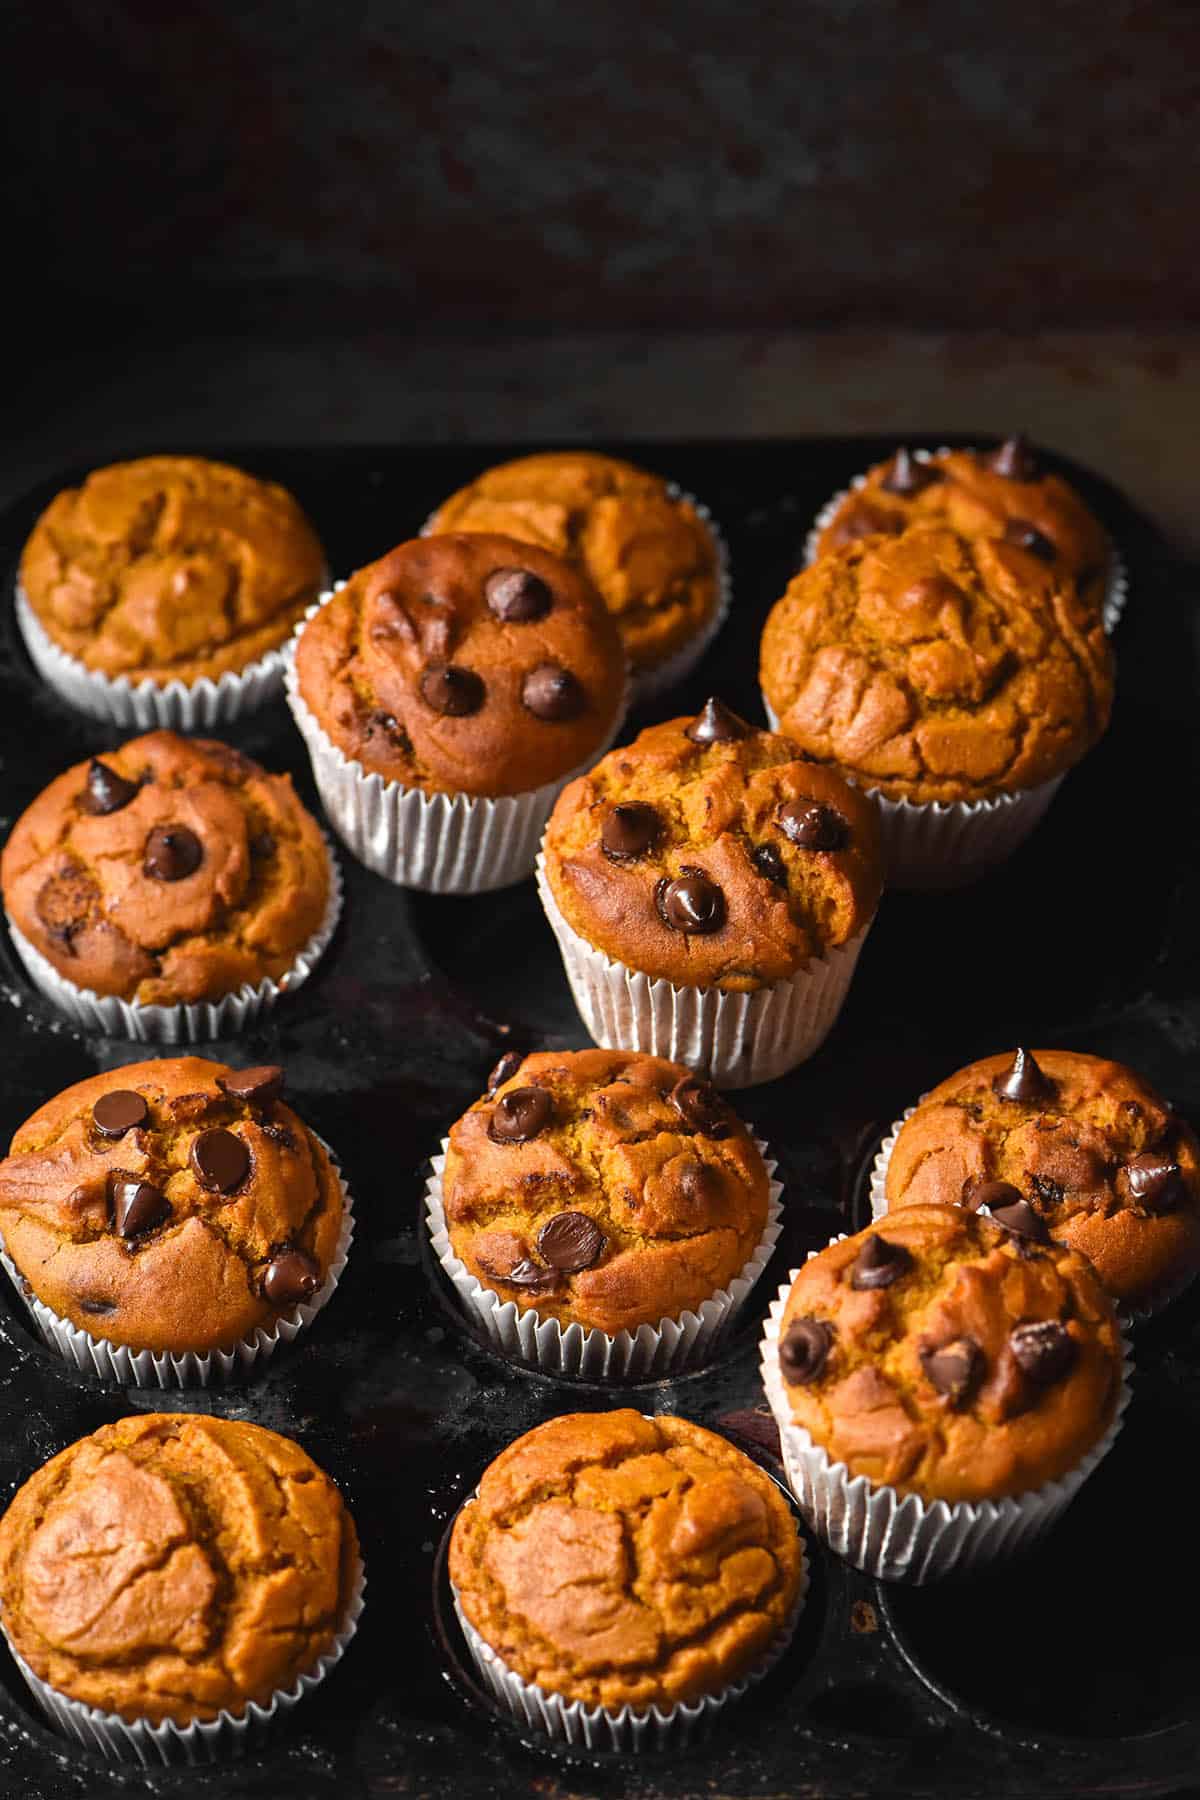 A dark and moody image of gluten free pumpkin choc chip muffins in white muffin liners casually arranged on a dark mottled muffin tray against a black backdrop.